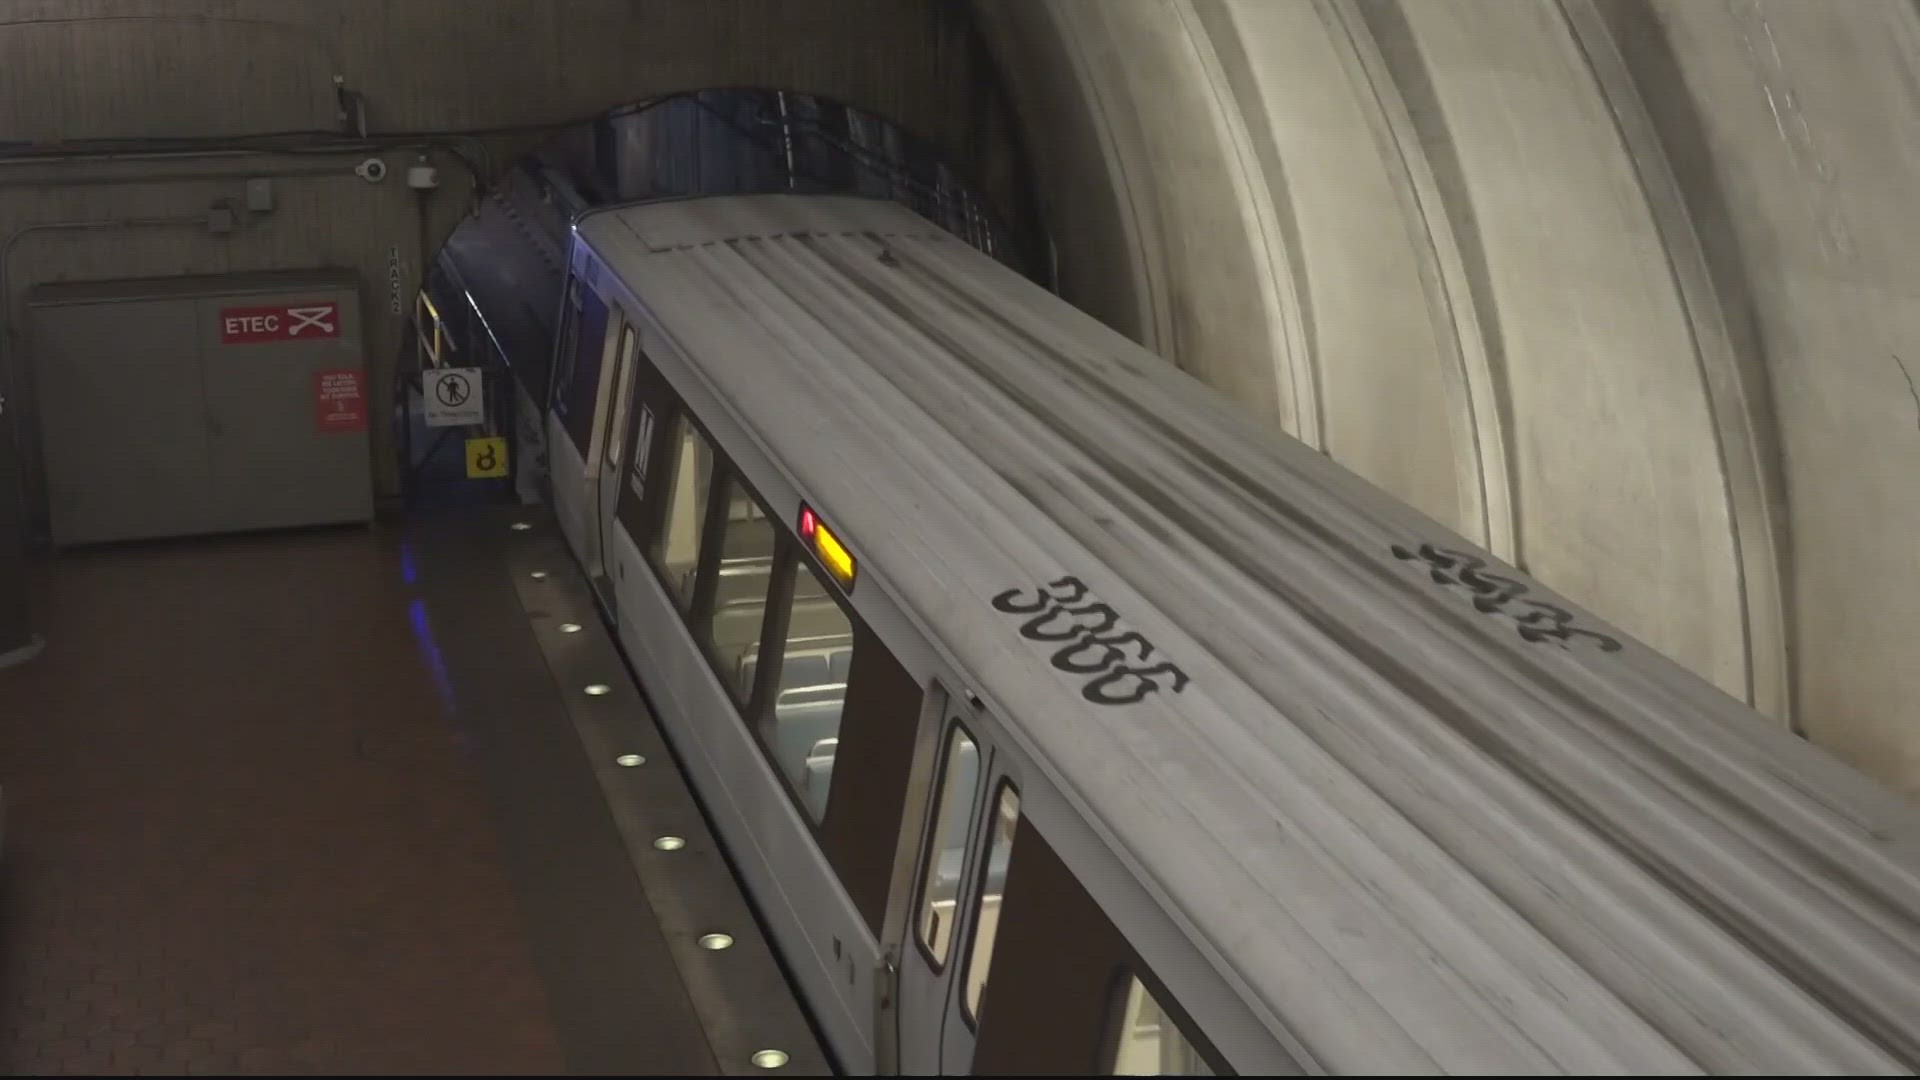 Last Wednesday, Metro said it saw its highest ridership since the pandemic with more than 337,000 trips.